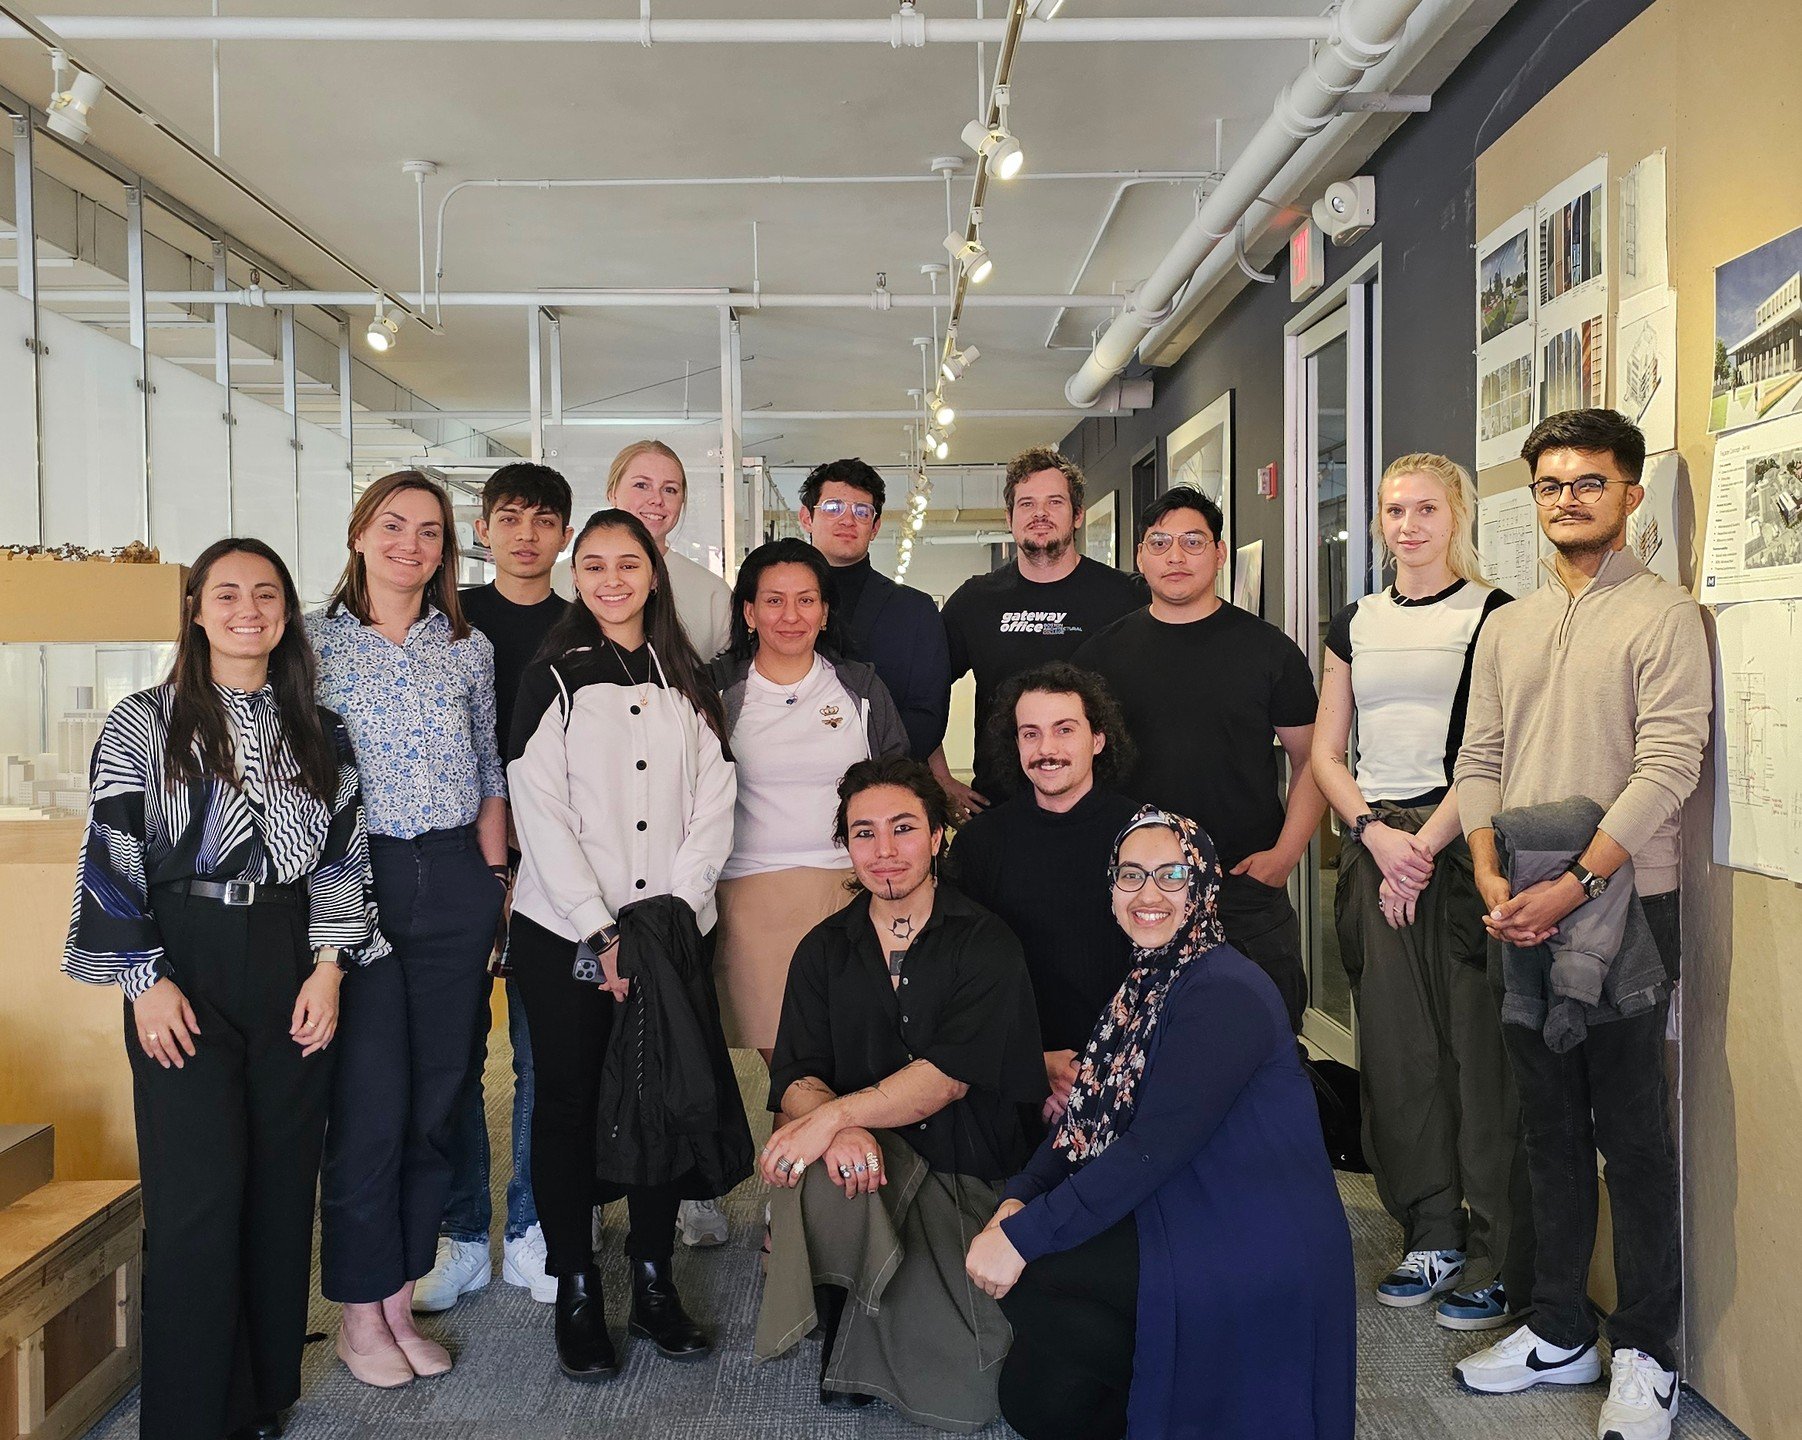 Last week, students from the Boston Architectural College's NOMAS chapter toured our office and participated with us in a dynamic roundtable discussion of projects, constraints, and opportunities. As a firm committed to creating diverse and equitable